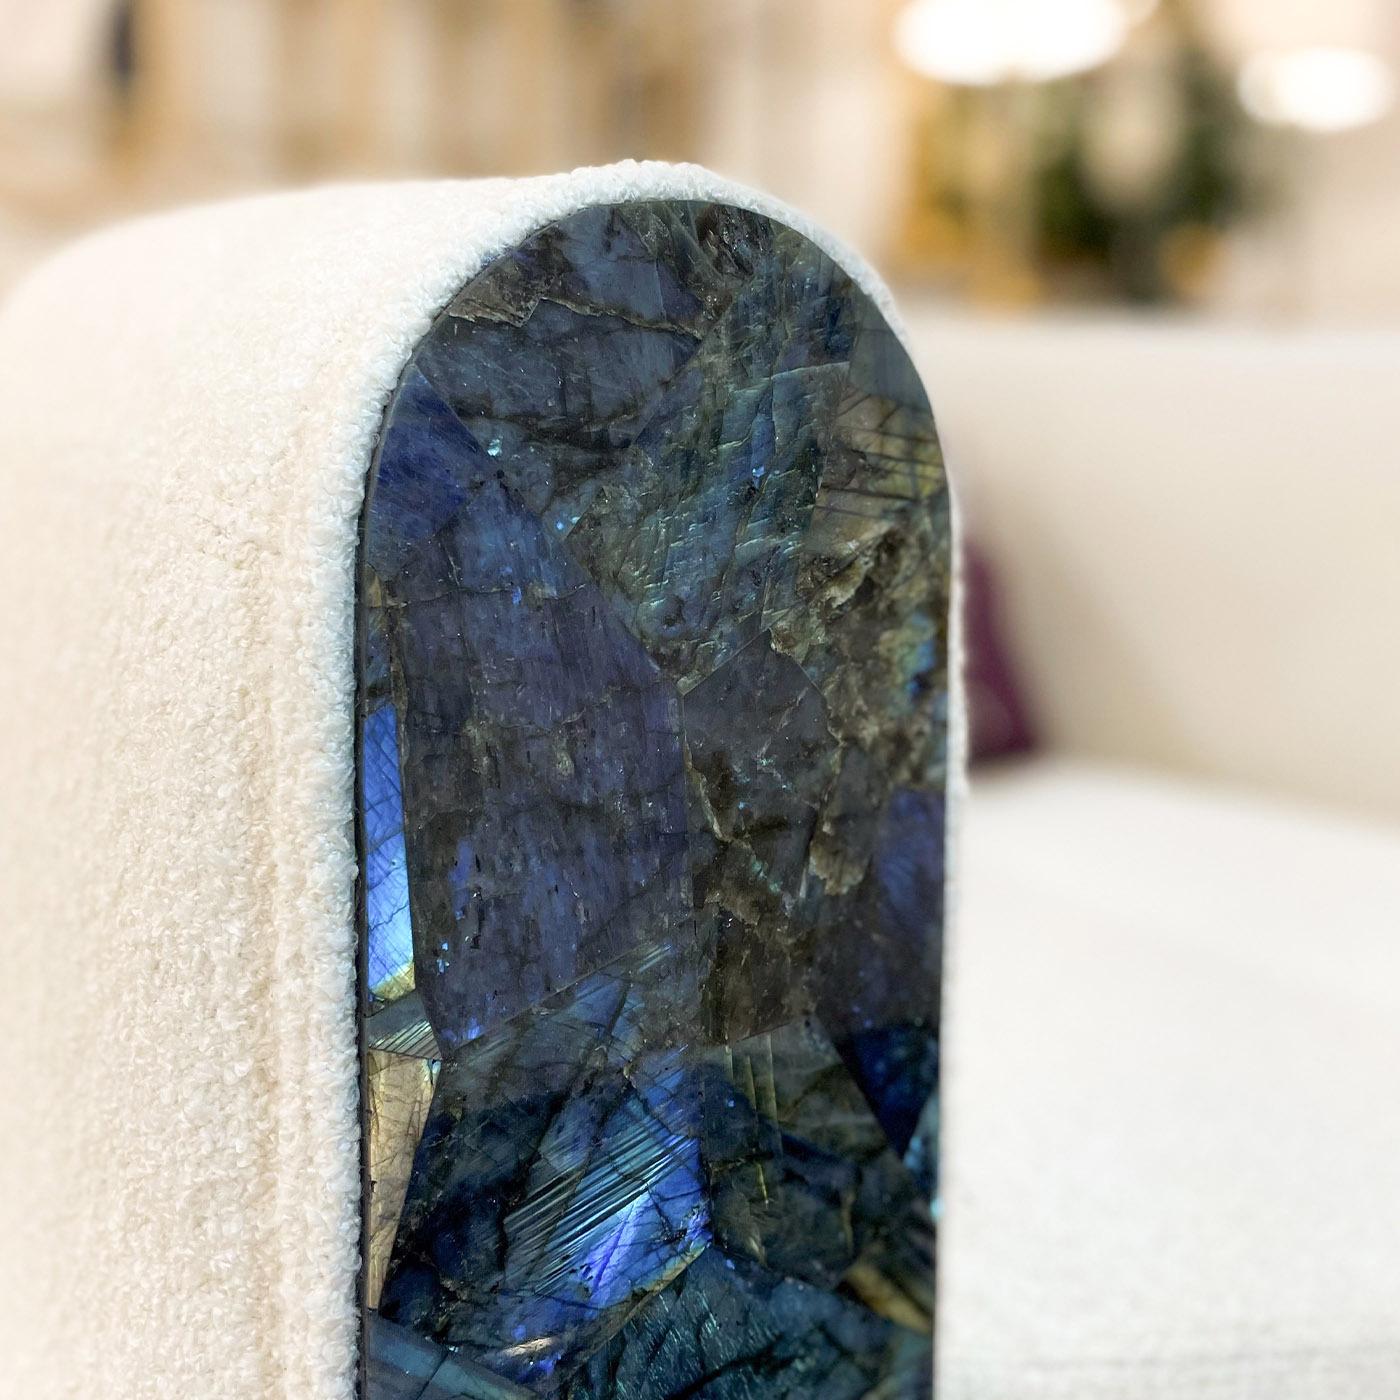 Exceptional comfort and refinement flawlessly combine in this spectacular armchair, making it an exclusive accent piece for a lavish living area. Distinguished by magnificent Labradorite inserts, it is handmade of wood upholstered with white fabric